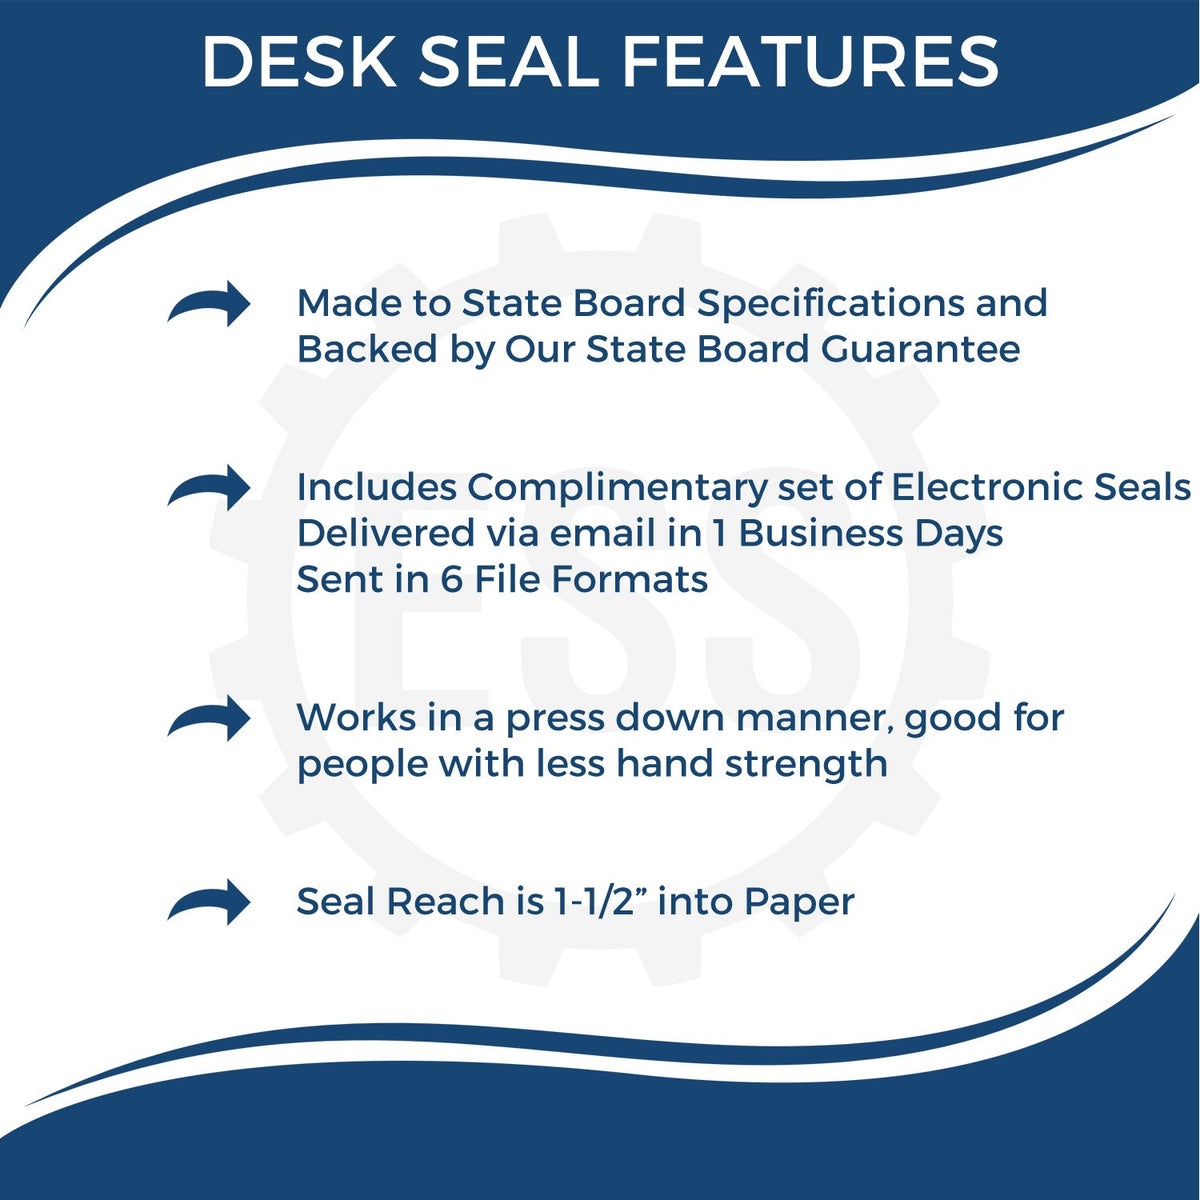 A picture of an infographic highlighting the selling points for the Utah Engineer Desk Seal